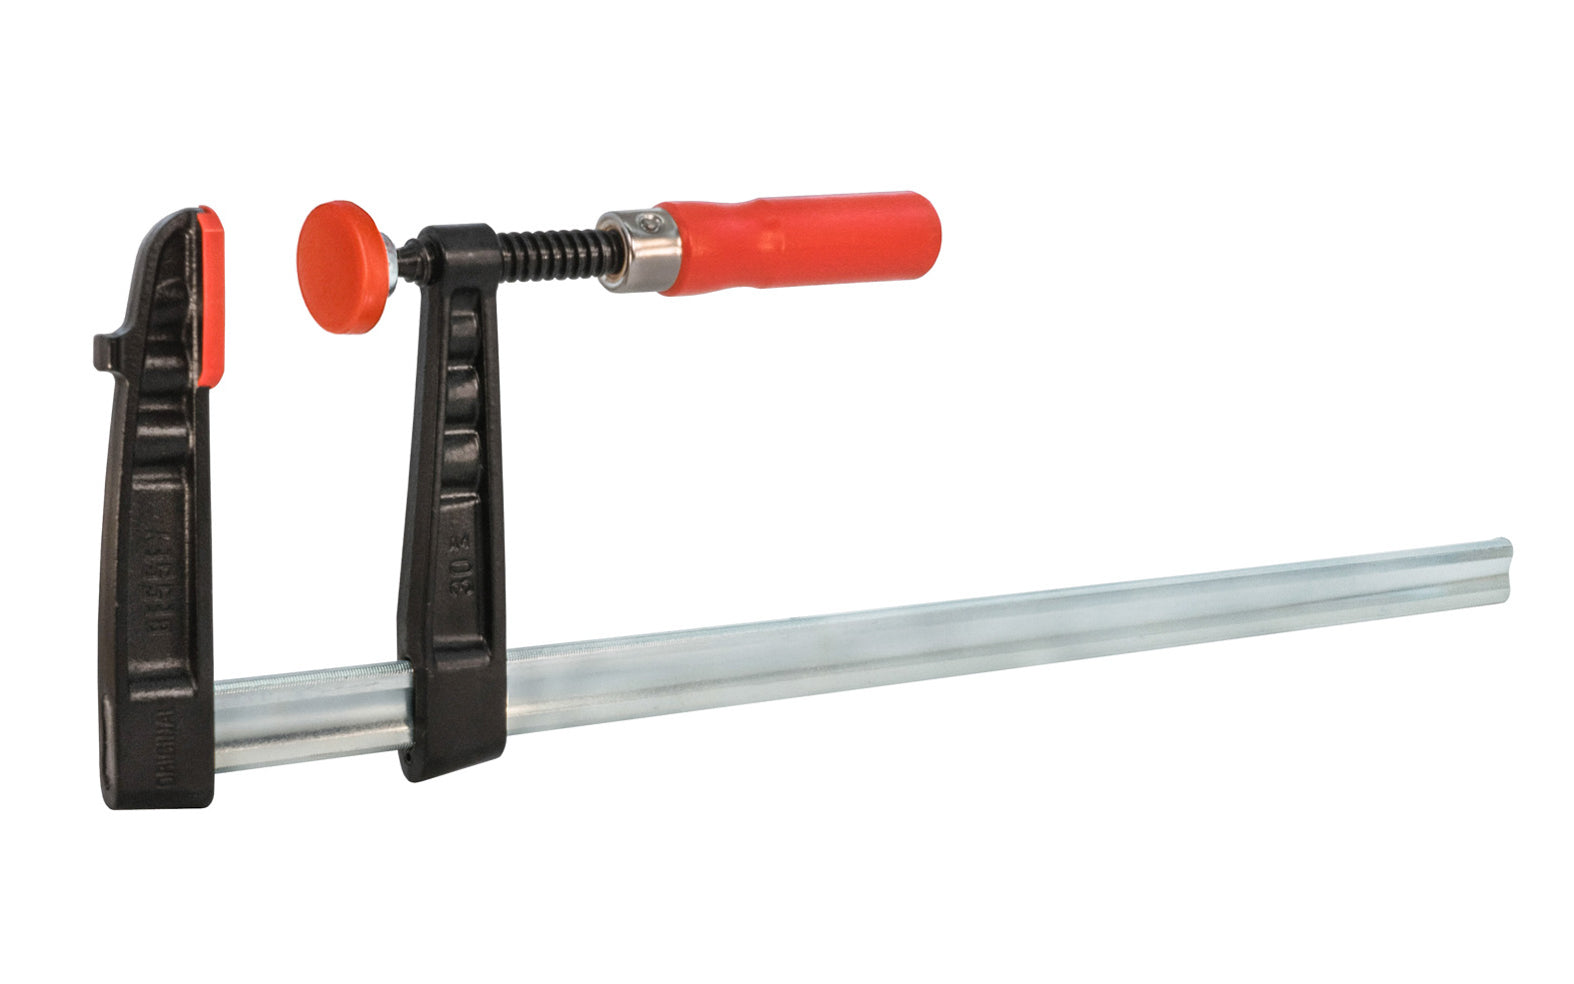 This Bessey 24" Medium-Duty Steel Bar Clamp head is made of malleable cast iron. Fixed jaw & sliding arm generates powerful & rigid clamping. Wooden handles - 1320 lb. clamping pressure - Model TG5.524 - "TG series" Bessey Clamps 24" max opening - 5-1/2" throat depth - Made in Germany - 091162007631. Medium Duty Clamp